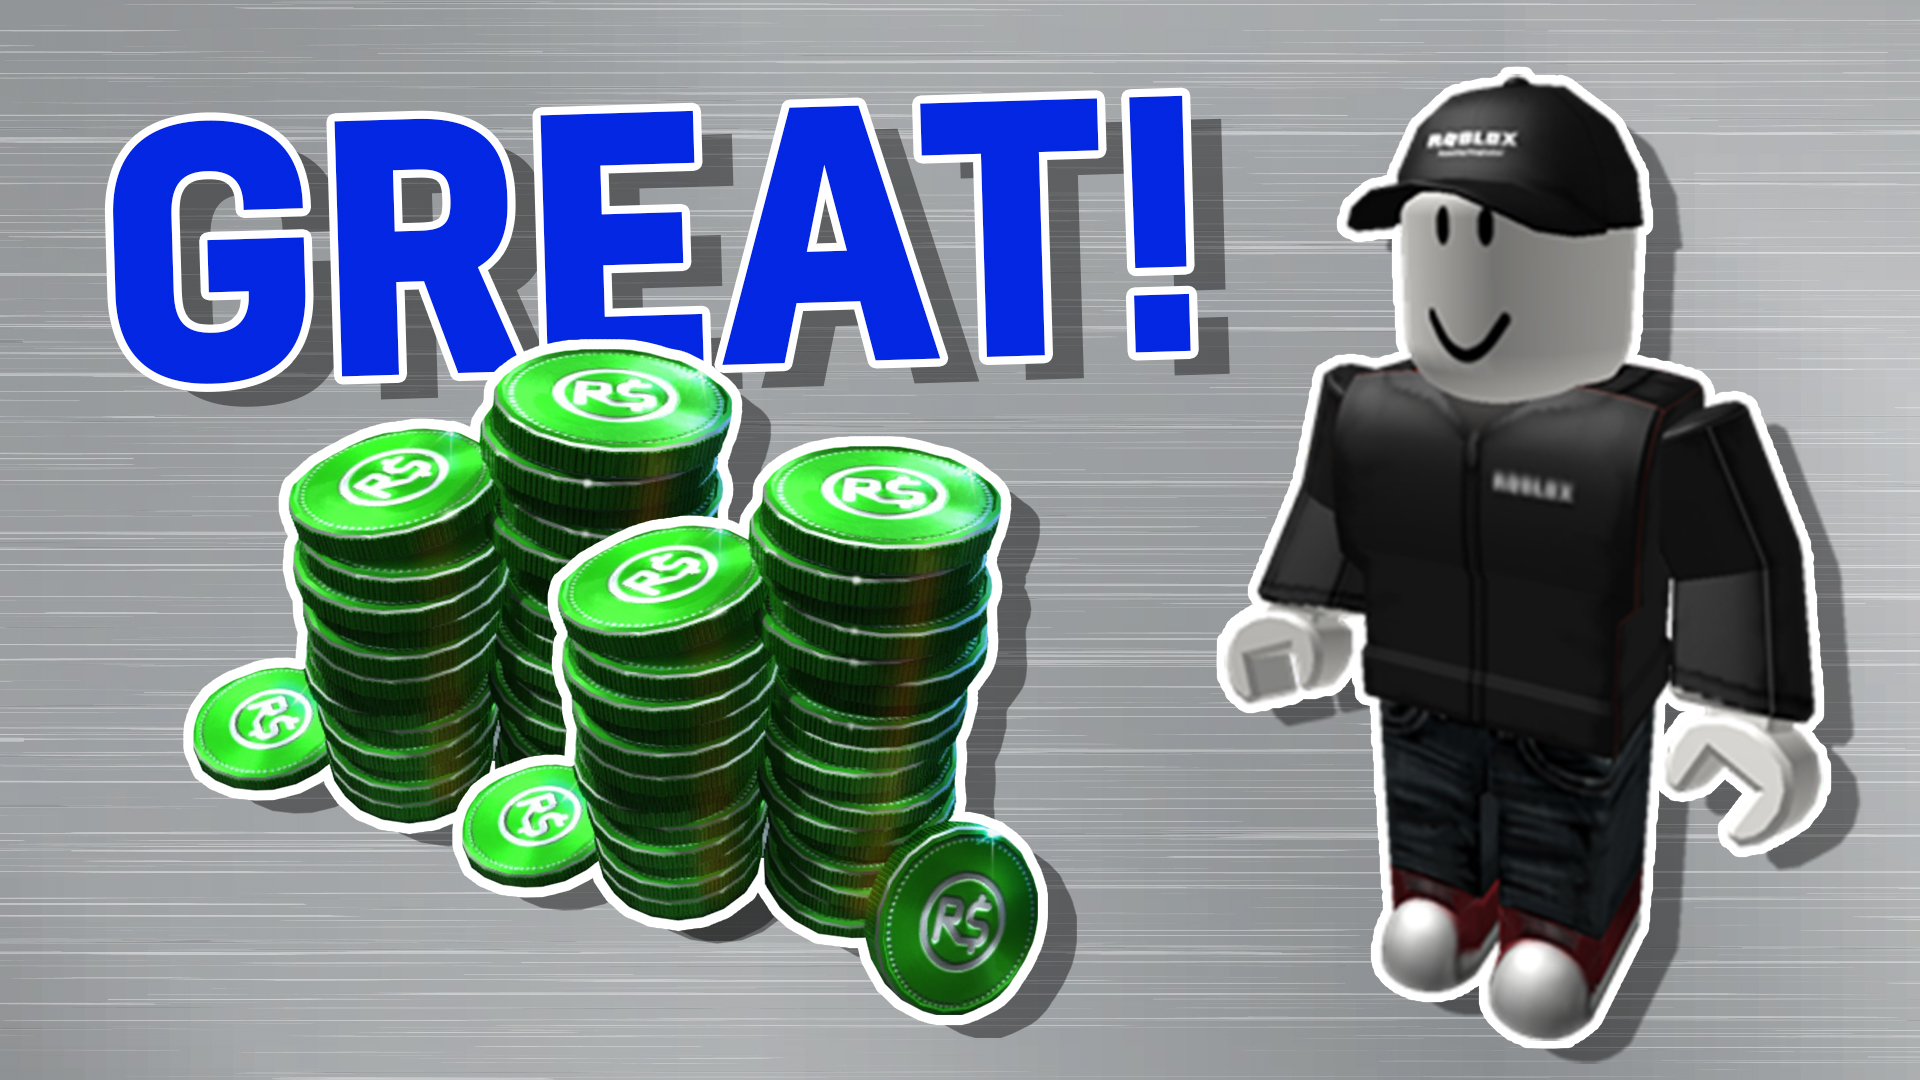 The Ultimate Quiz For Robux Roblox Quiz - earn 500 robux if you pass this roblox quiz